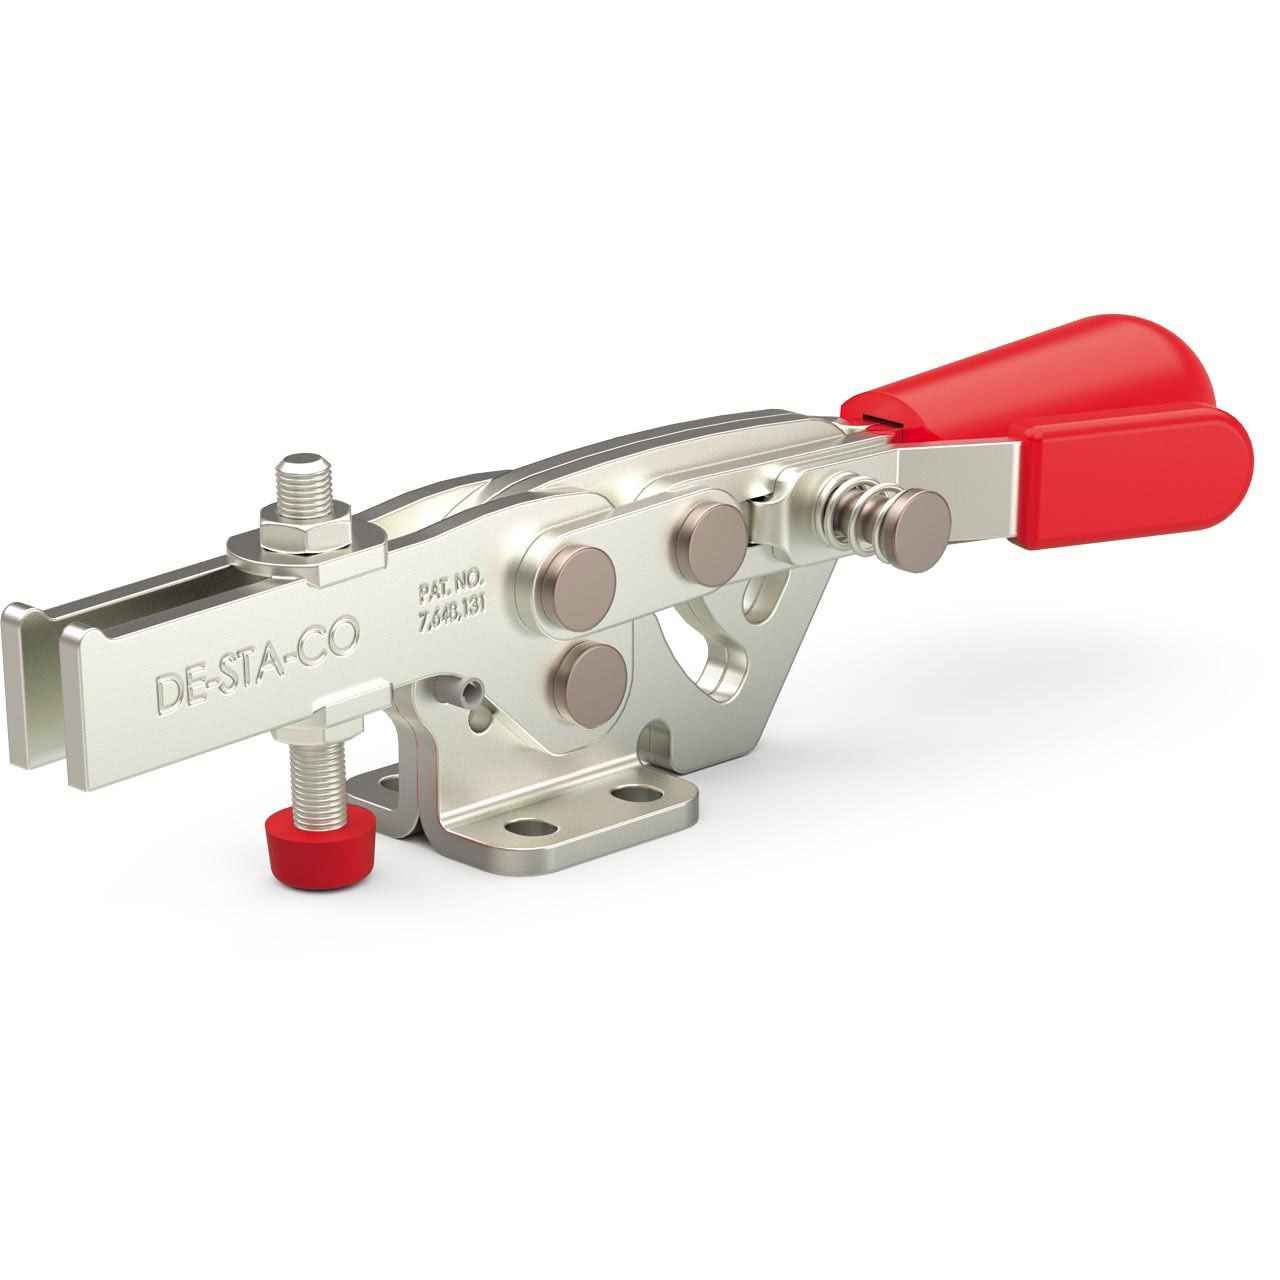 Destaco holddown clamps 2013 series